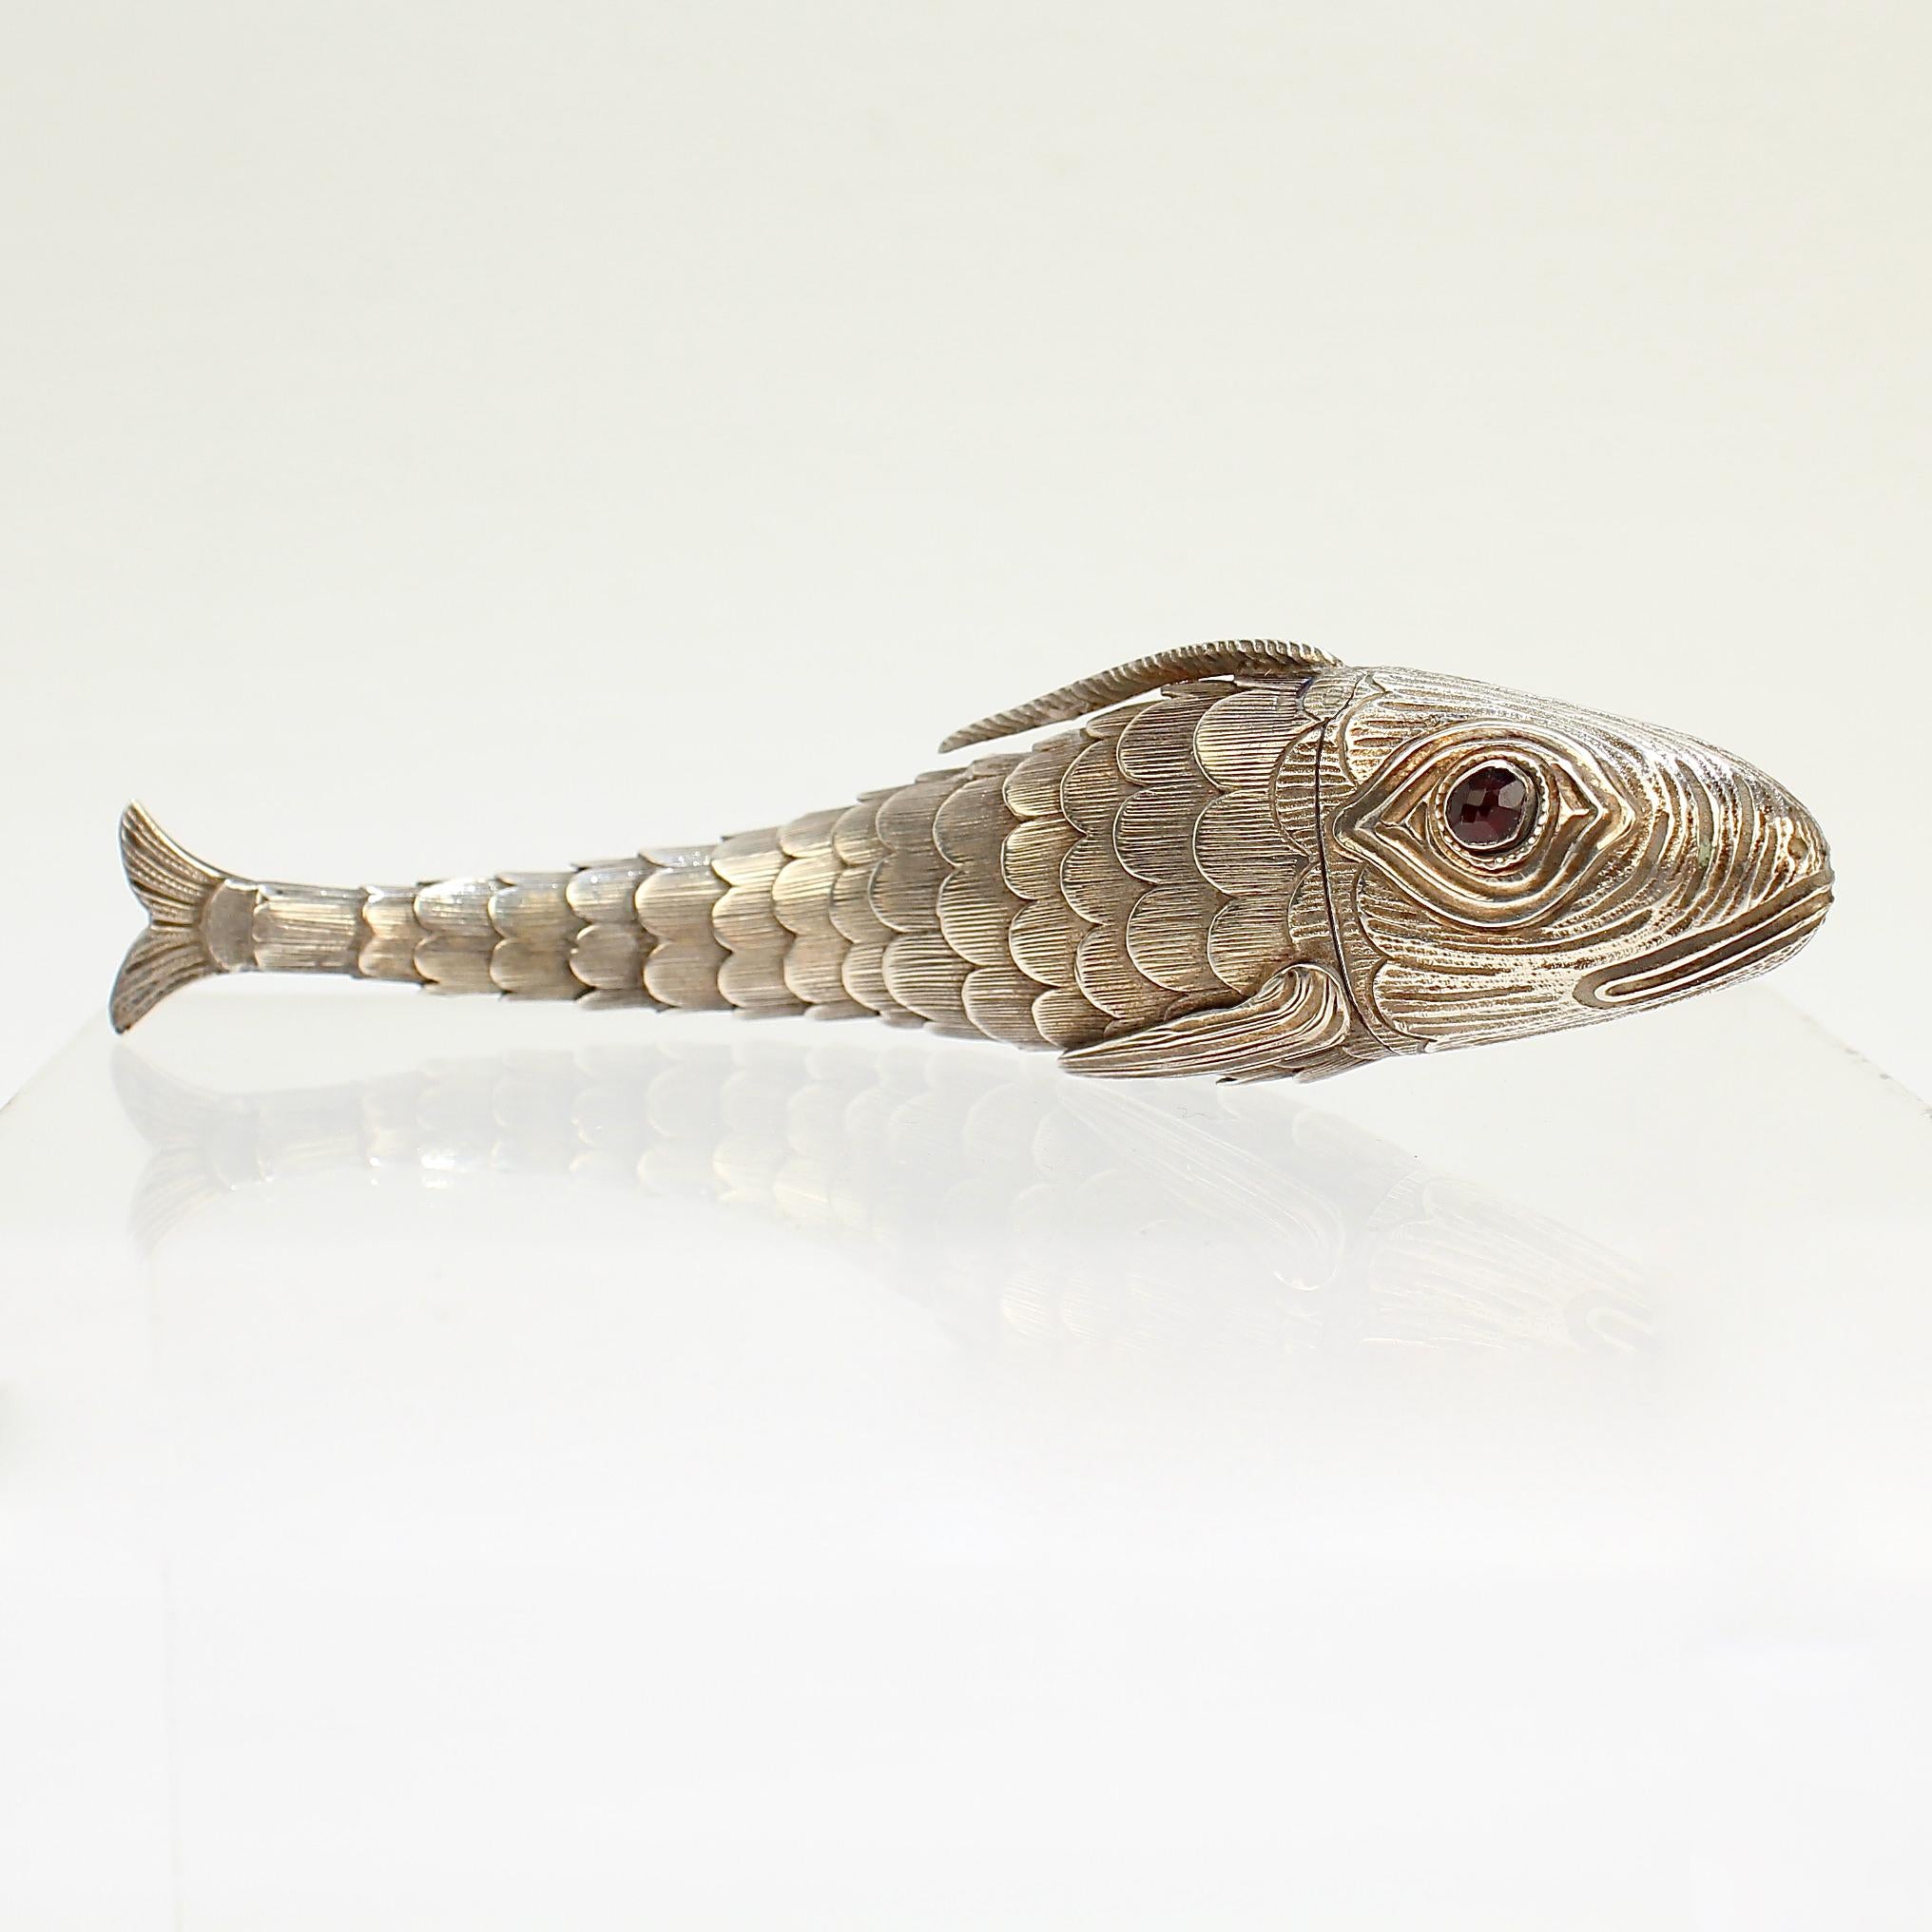 reticulated fish